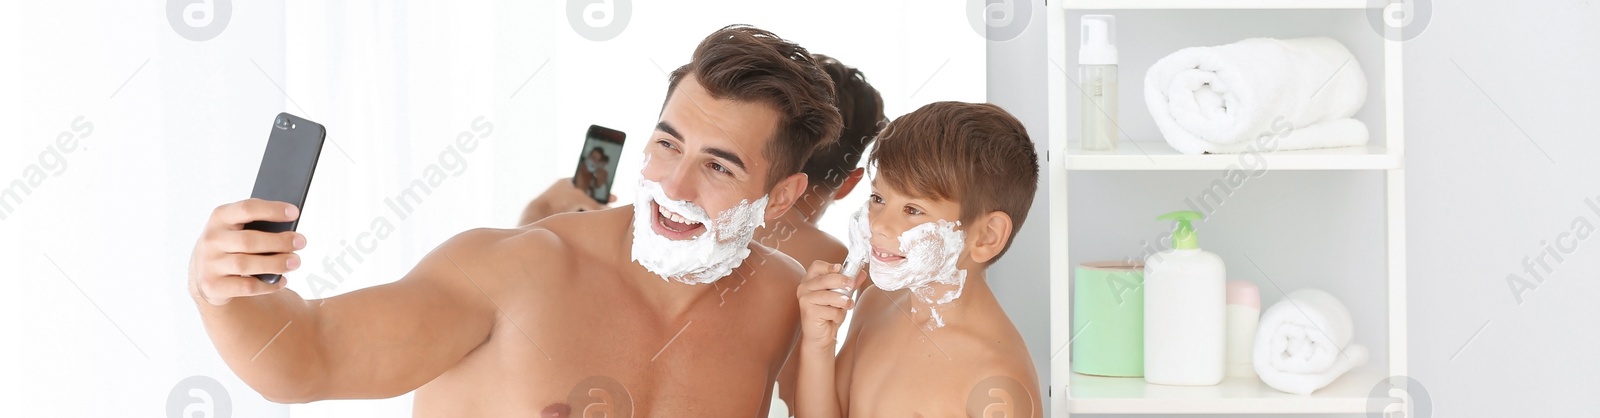 Image of Father and son taking selfie while shaving in bathroom. Banner design